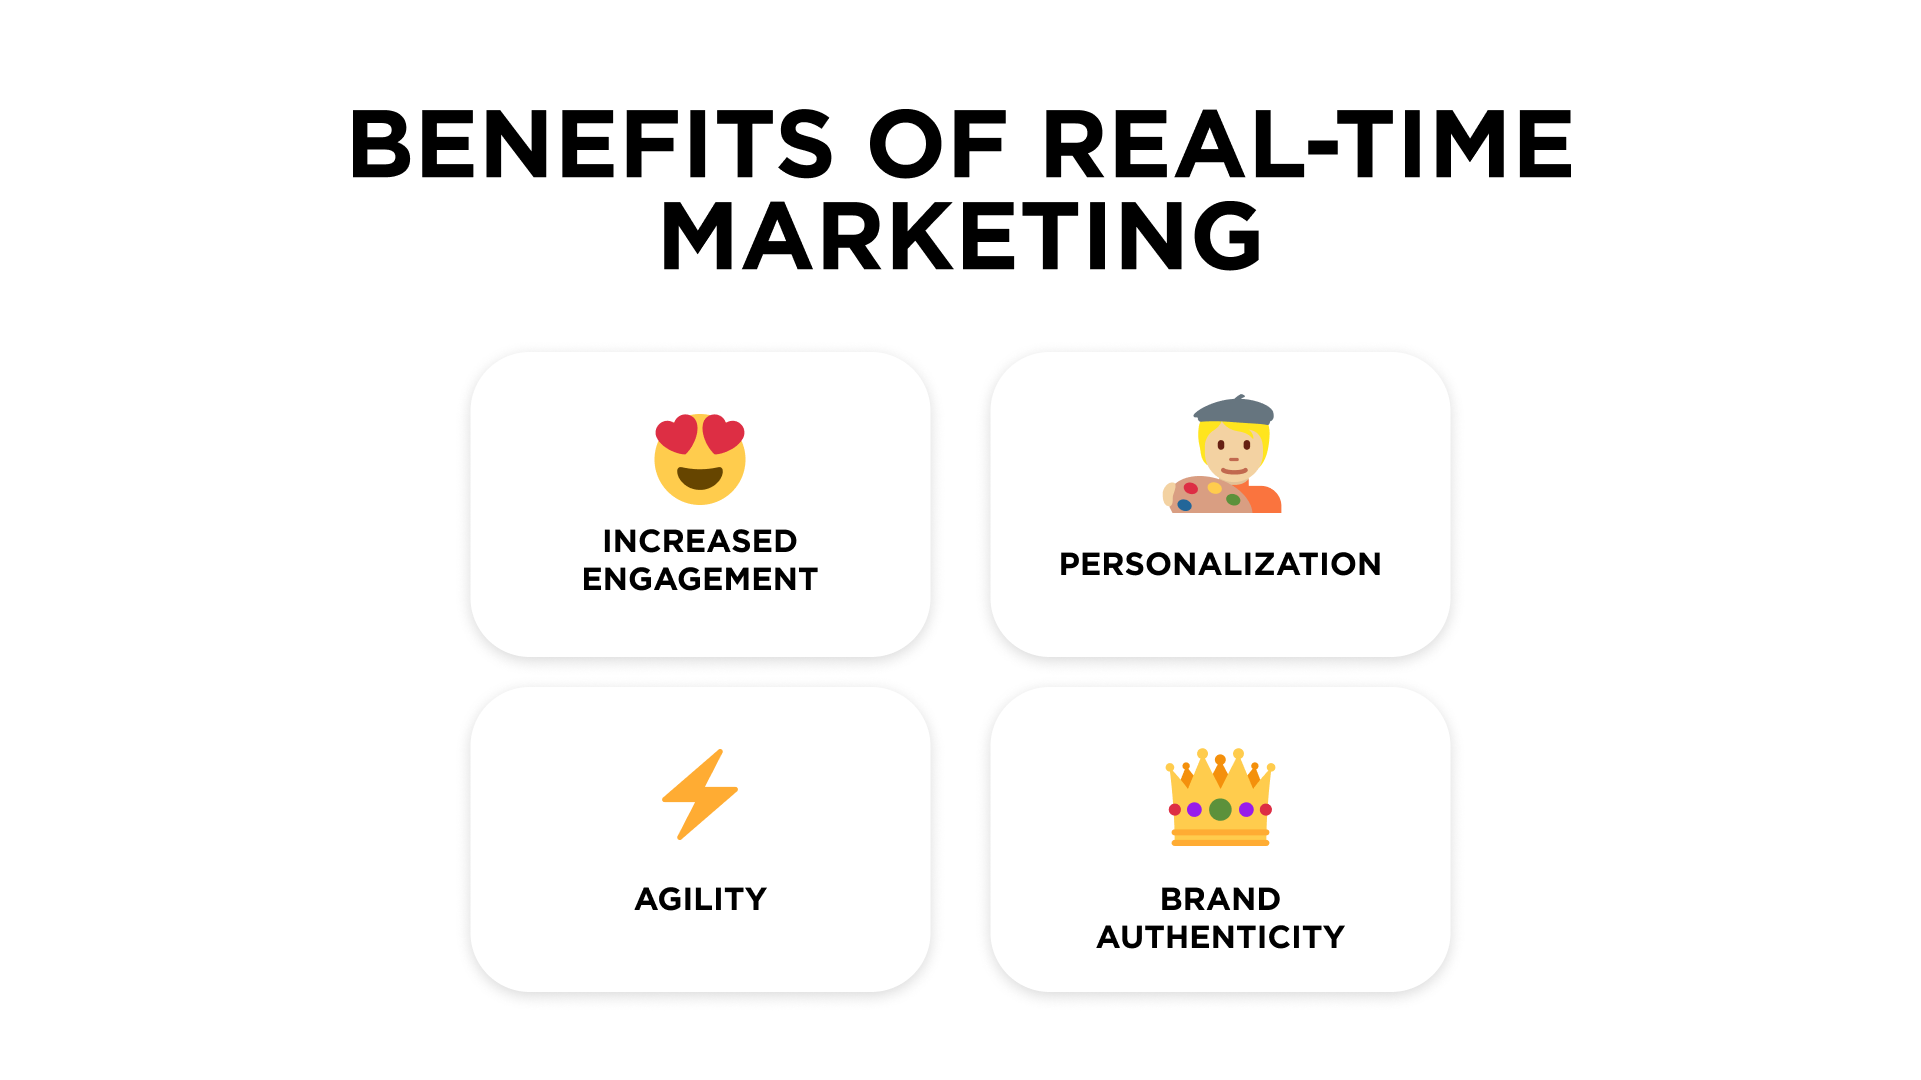 Benefits of Real-Time Marketing